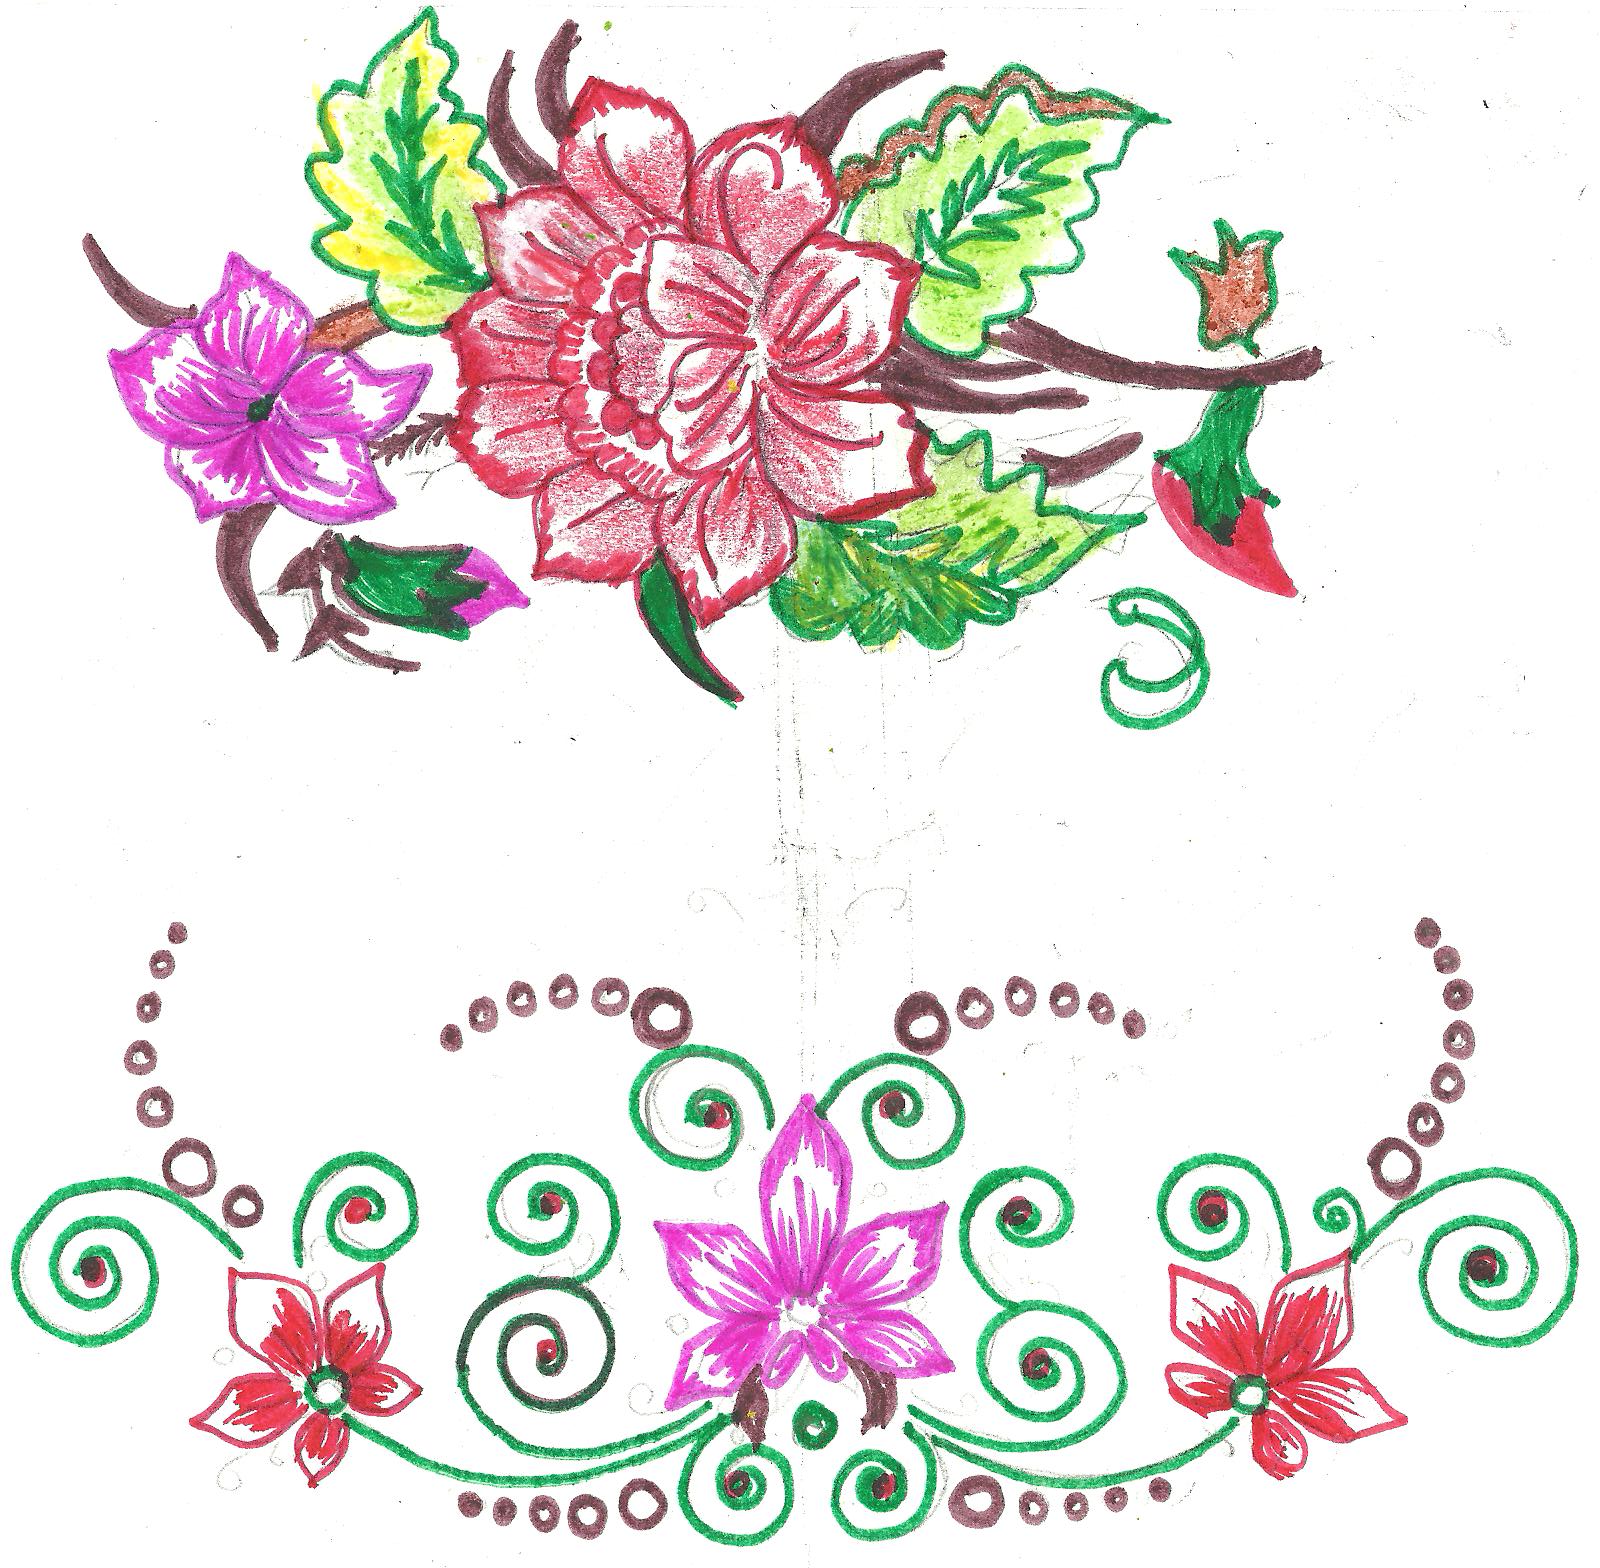 Mehndi,sketch,embroidery,painting: Fabric paint designs